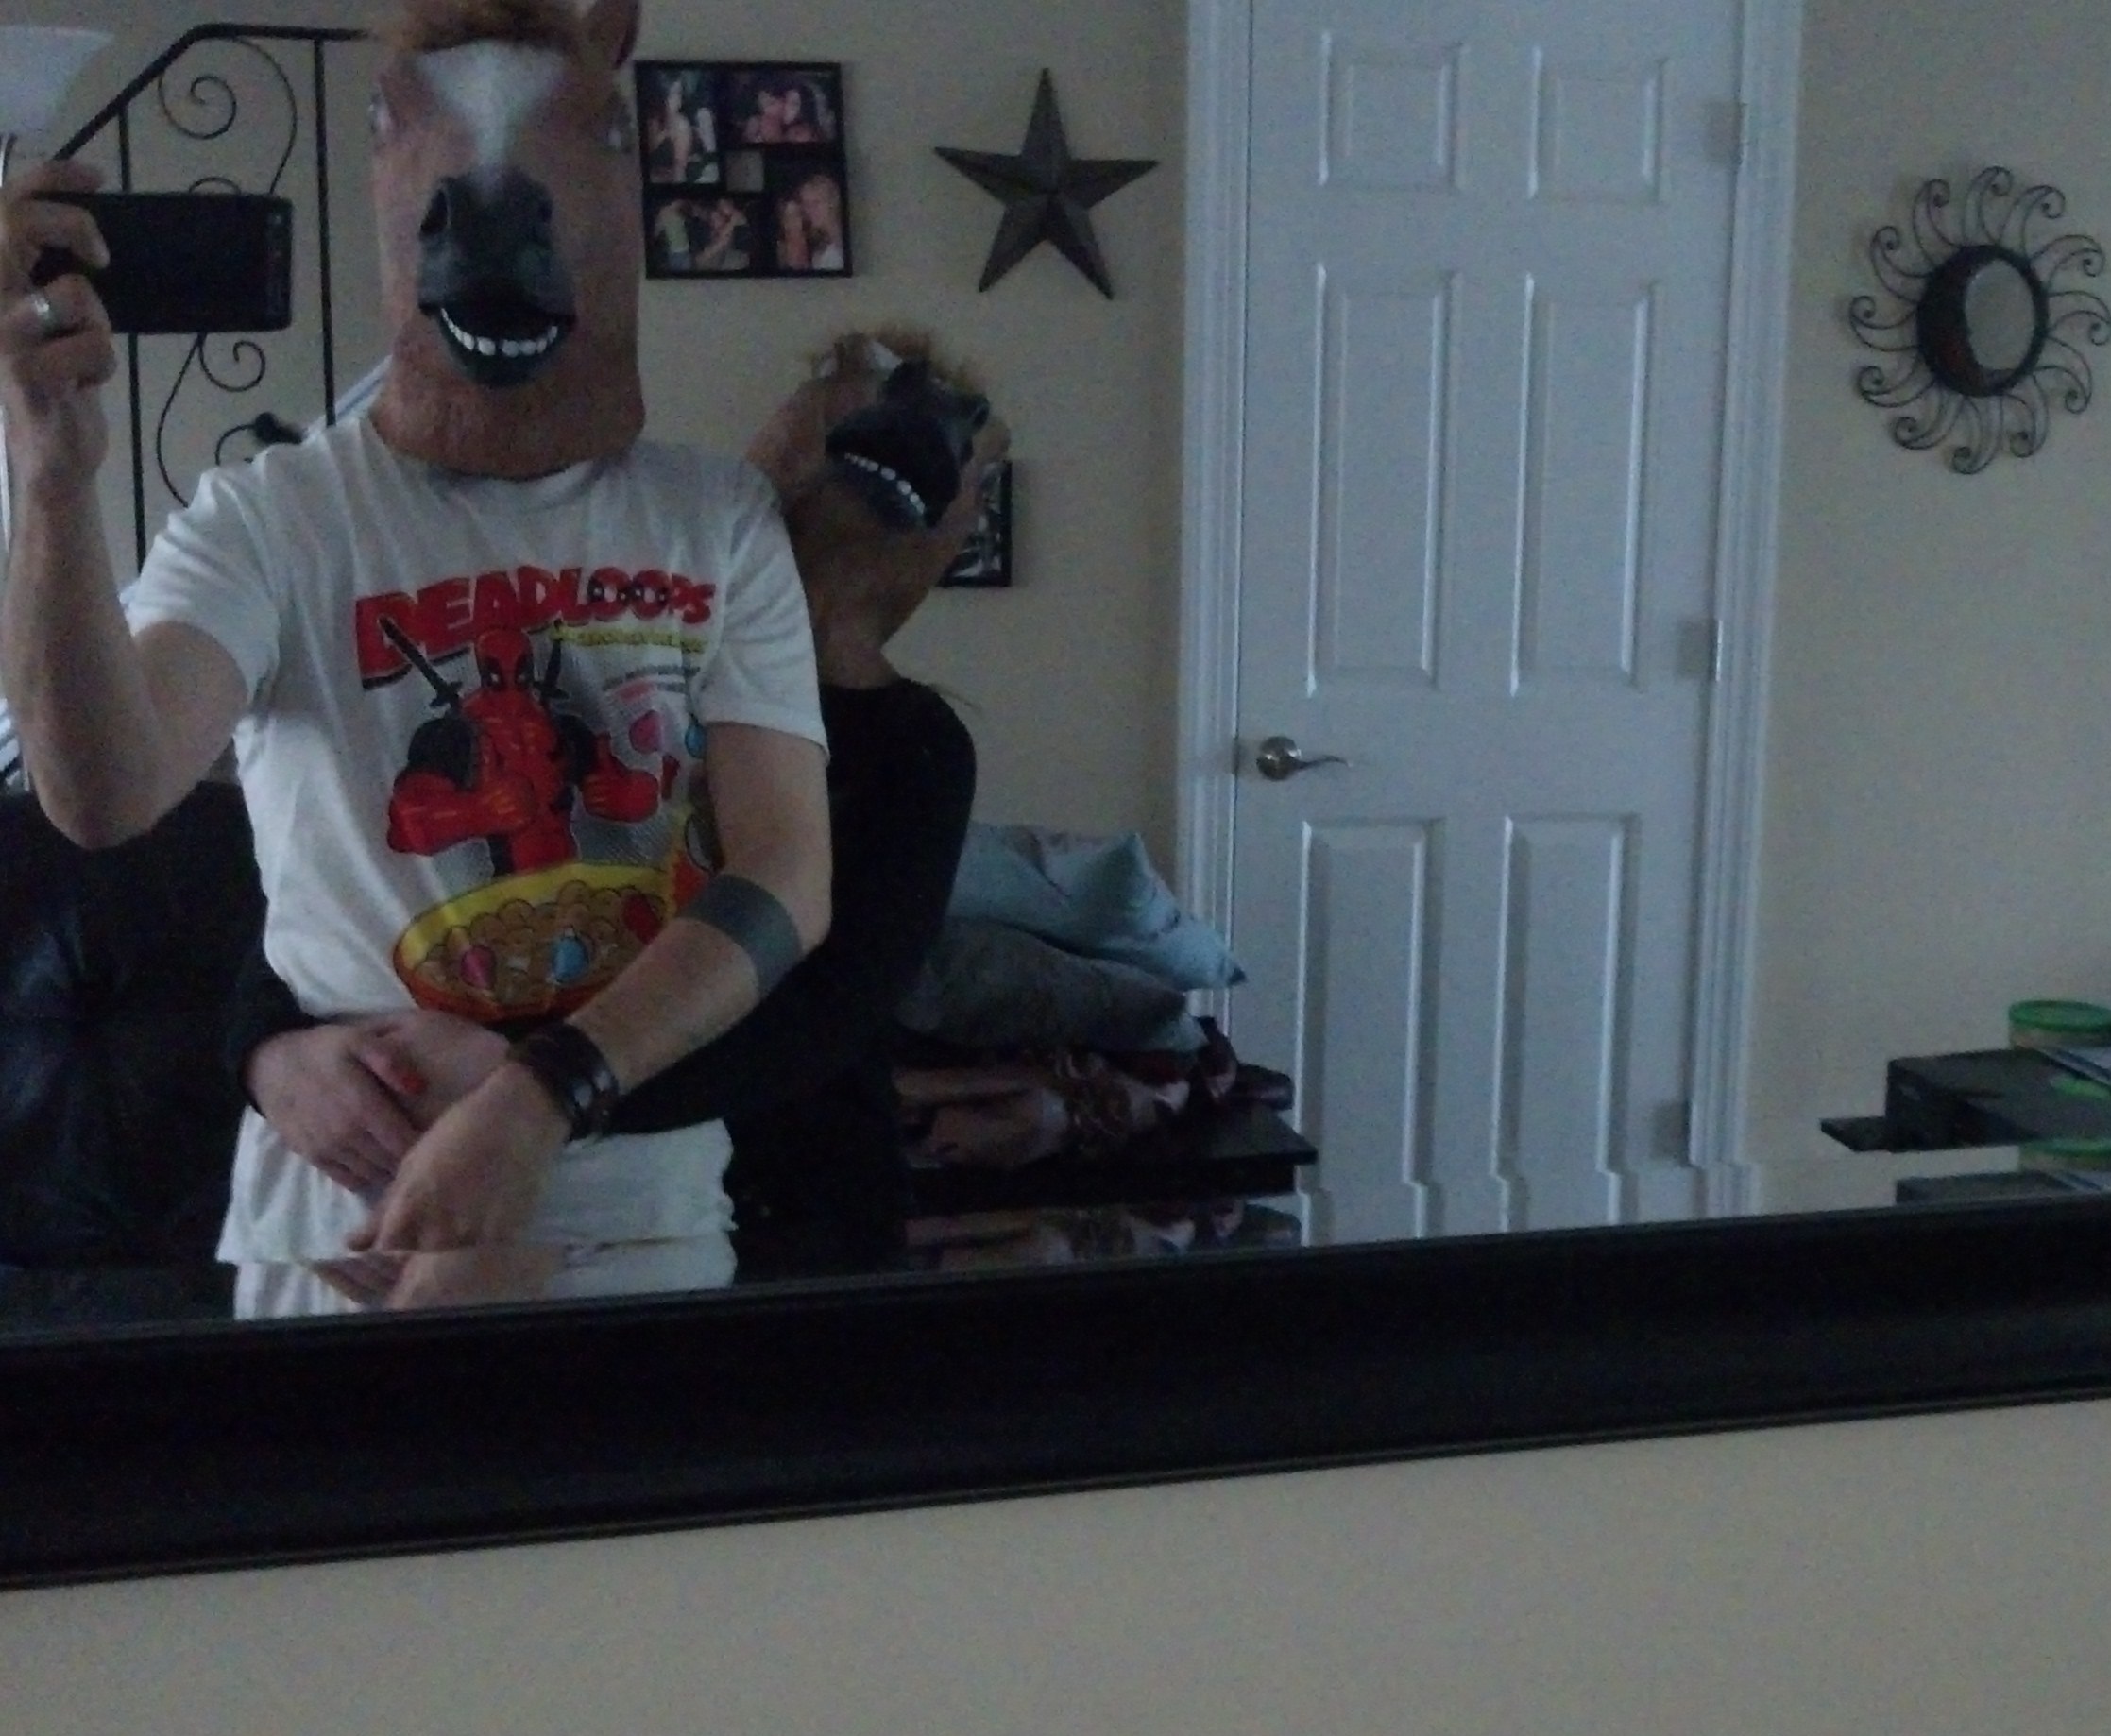 Just me and the Mrs. with our horse masks, no more, no less.